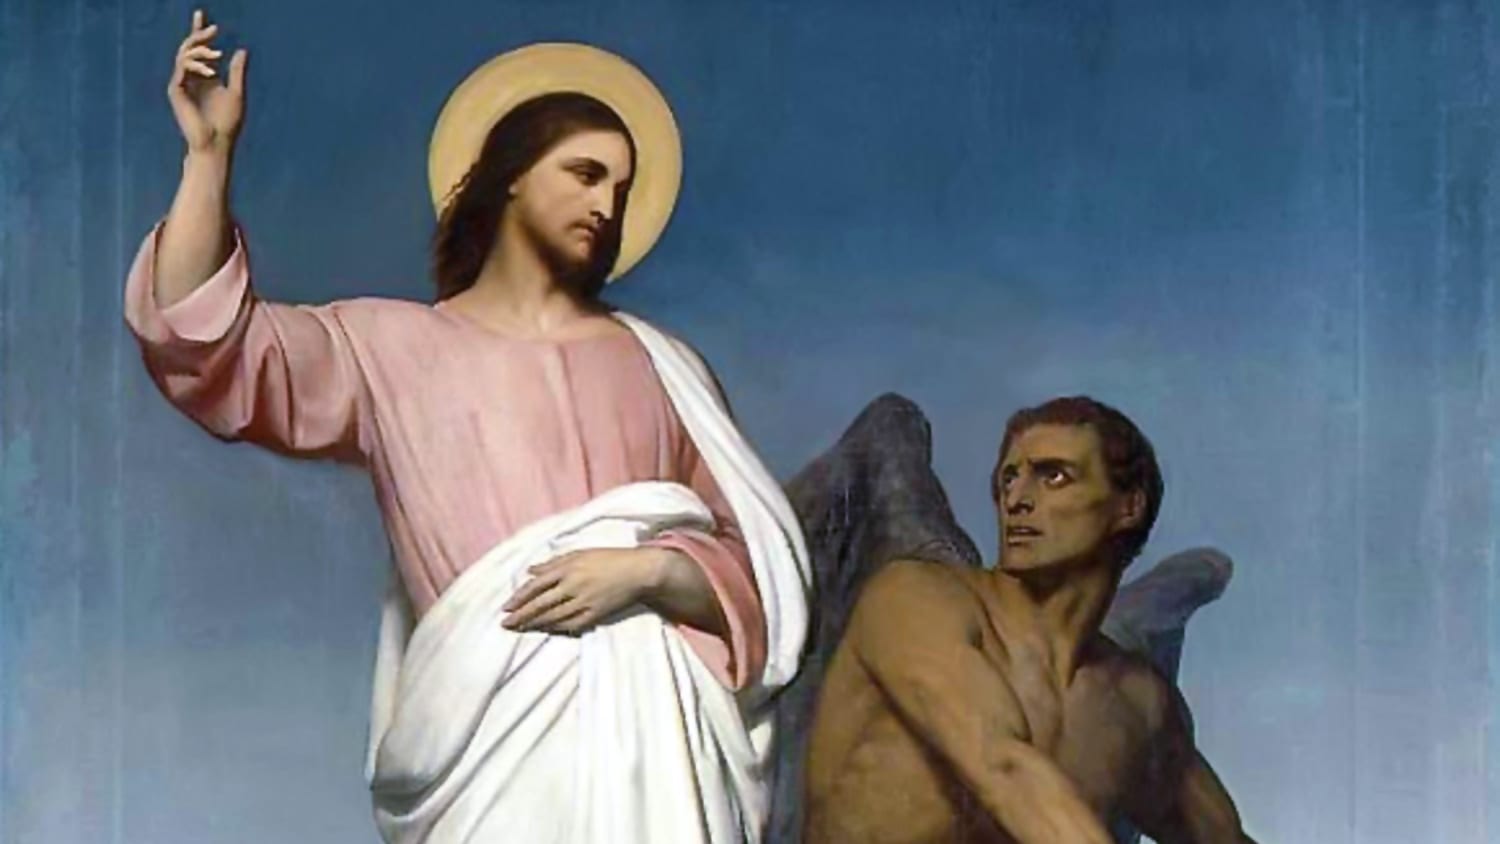 The Temptation of Christ (1854) by Ary Scheffer.